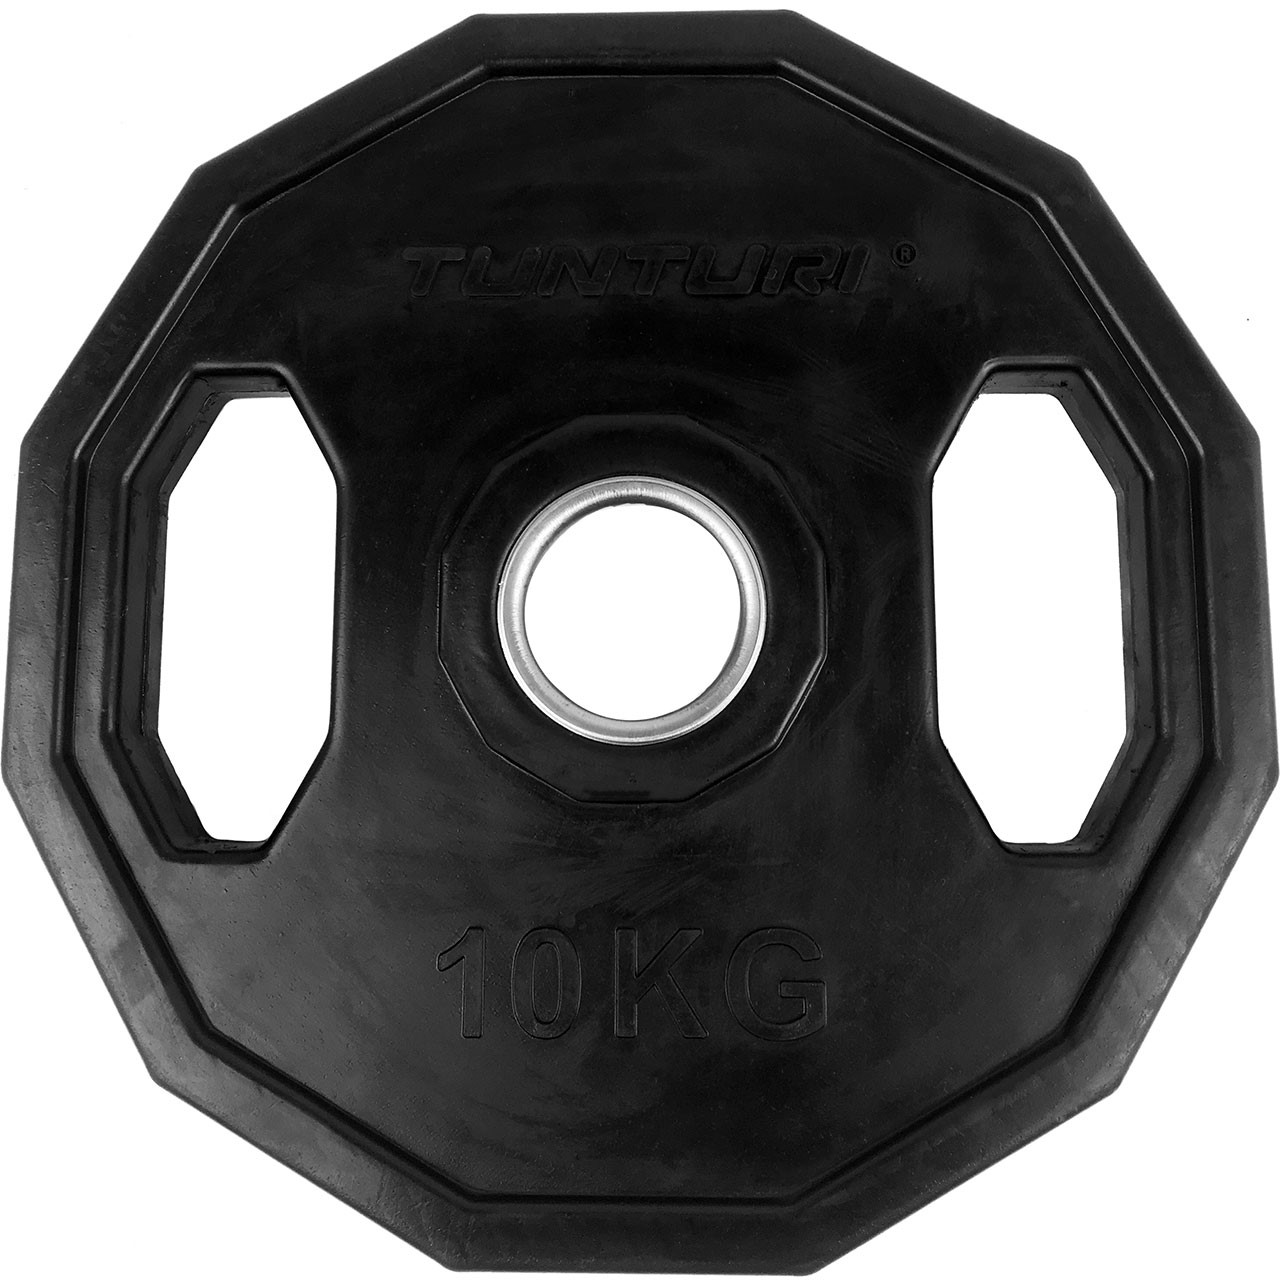 Rubber Covered 10 kg Tunturi Weight Plate 50 mm